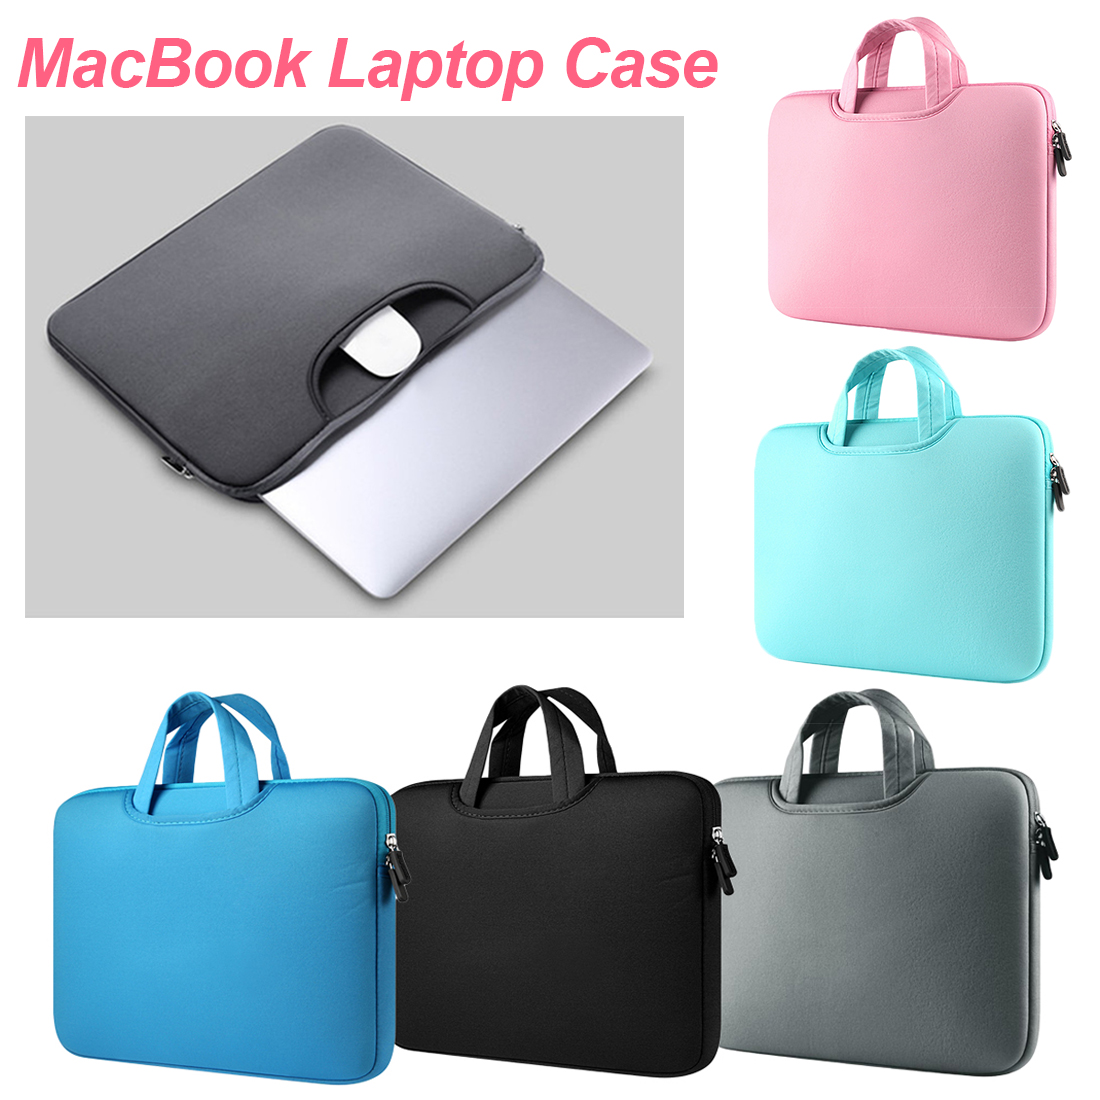 Sleeve Bag Laptop Case For Macbook Air Pro Retina 11.6'' 13.3'' 15.4'' 15.6'' For XiaoMi Notebook Cover For Huawei Matebook Csae